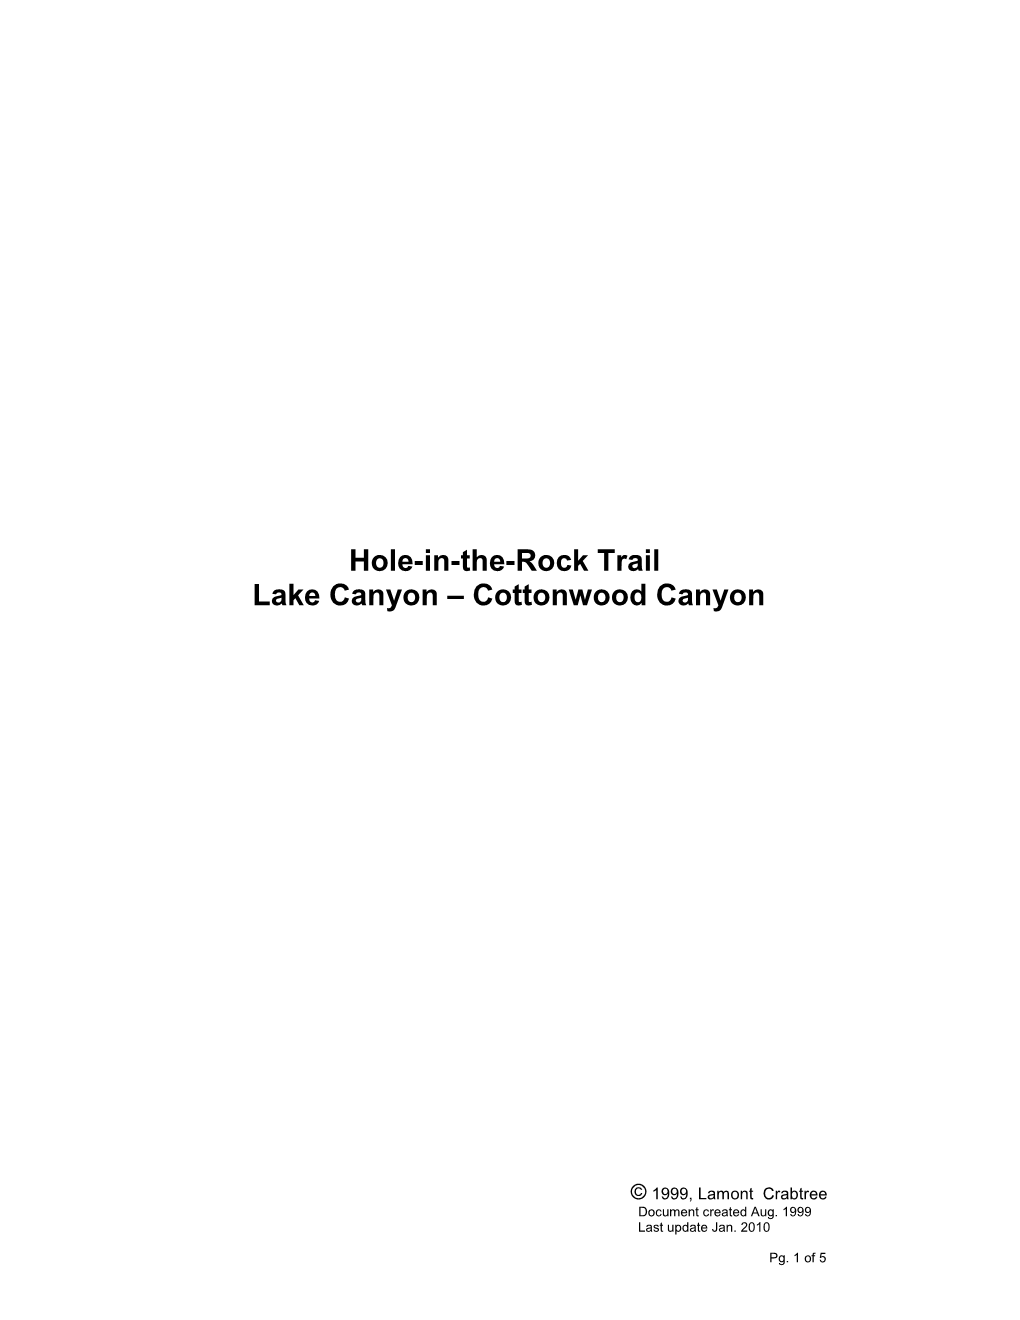 Hole-In-The-Rock Trail Lake Canyon – Cottonwood Canyon